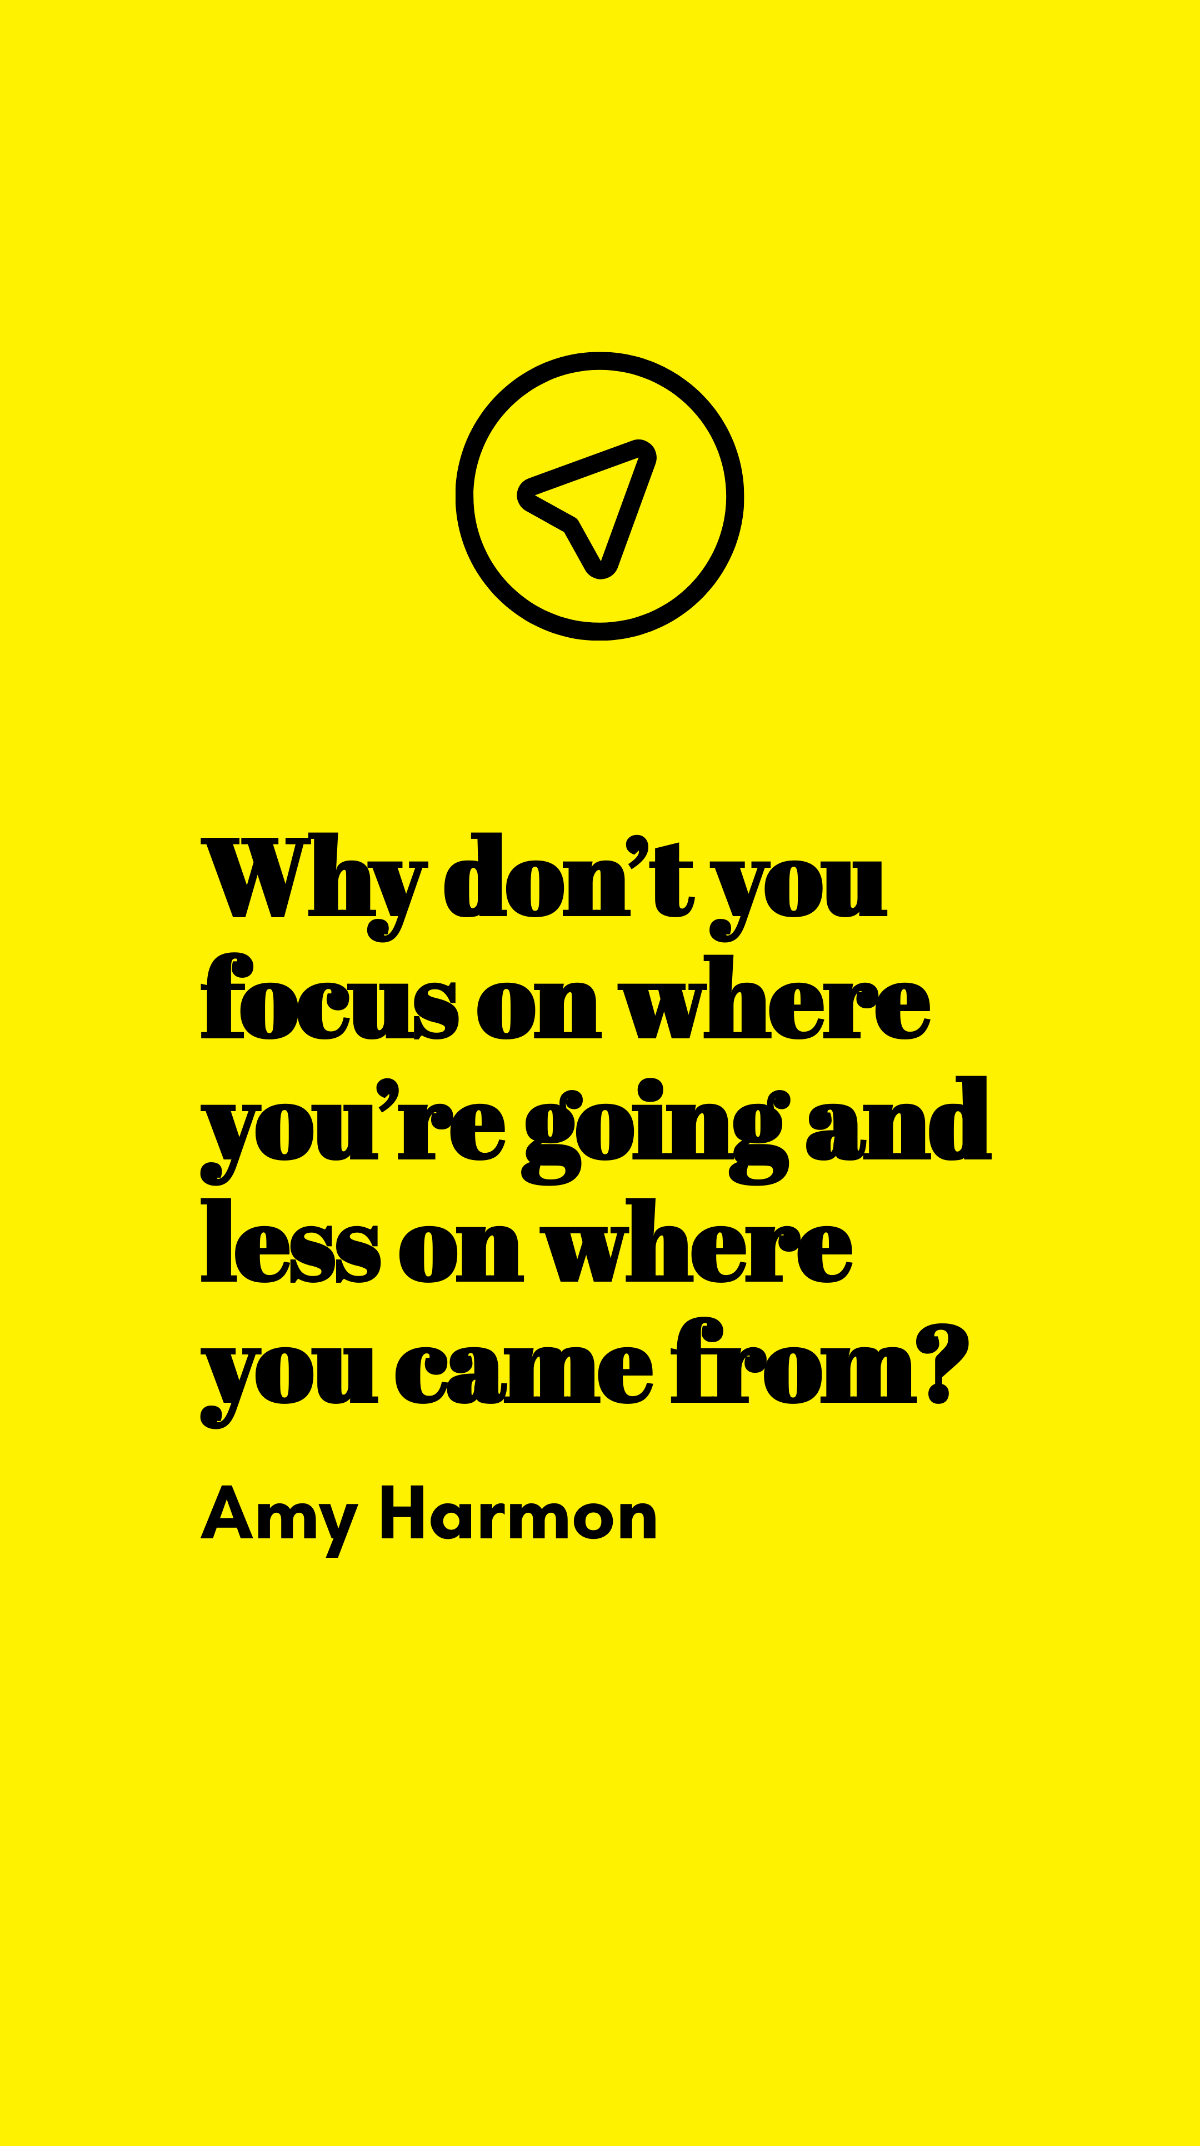 Free Amy Harmon - Why don’t you focus on where you’re going and less on where you came from? Template